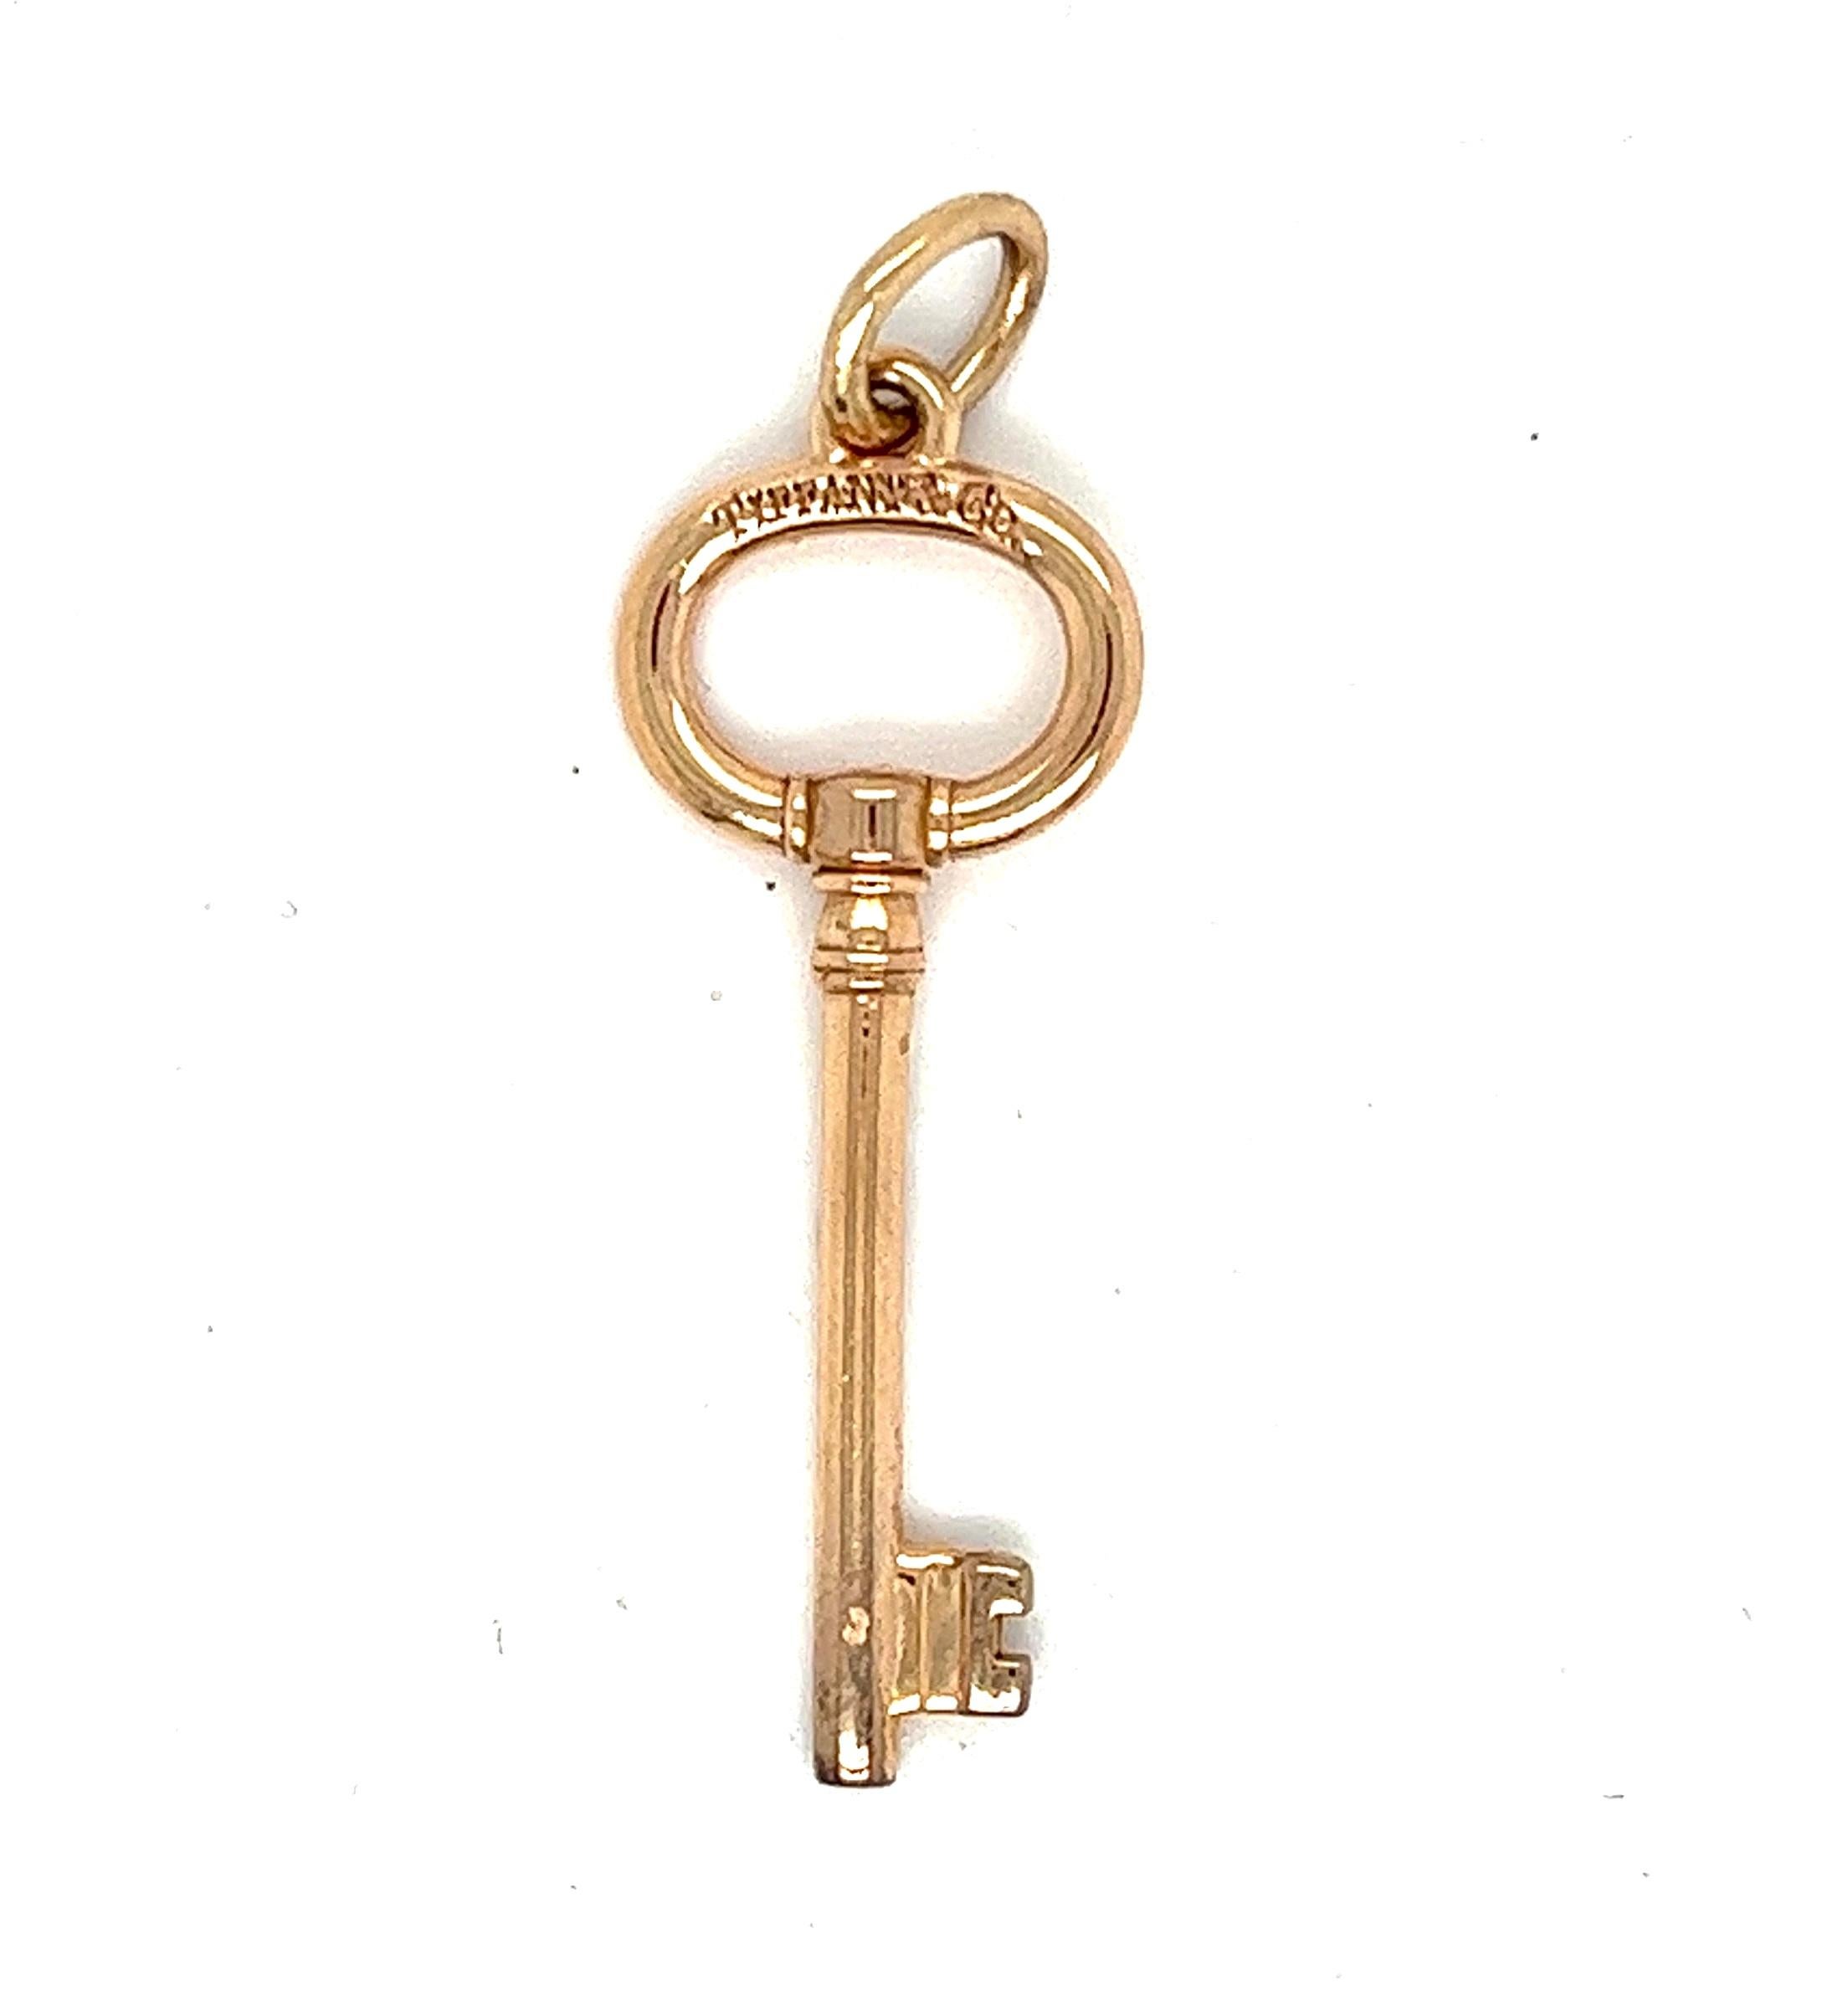 Tiffany & Co. Authentic Open Round Key Pendant - 18kt Rose Gold

Unlock elegance with the iconic Tiffany & Co. Open Round Key Pendant in exquisite 18kt rose gold. This timeless piece embodies sophistication and luxury, showcasing Tiffany's renowned